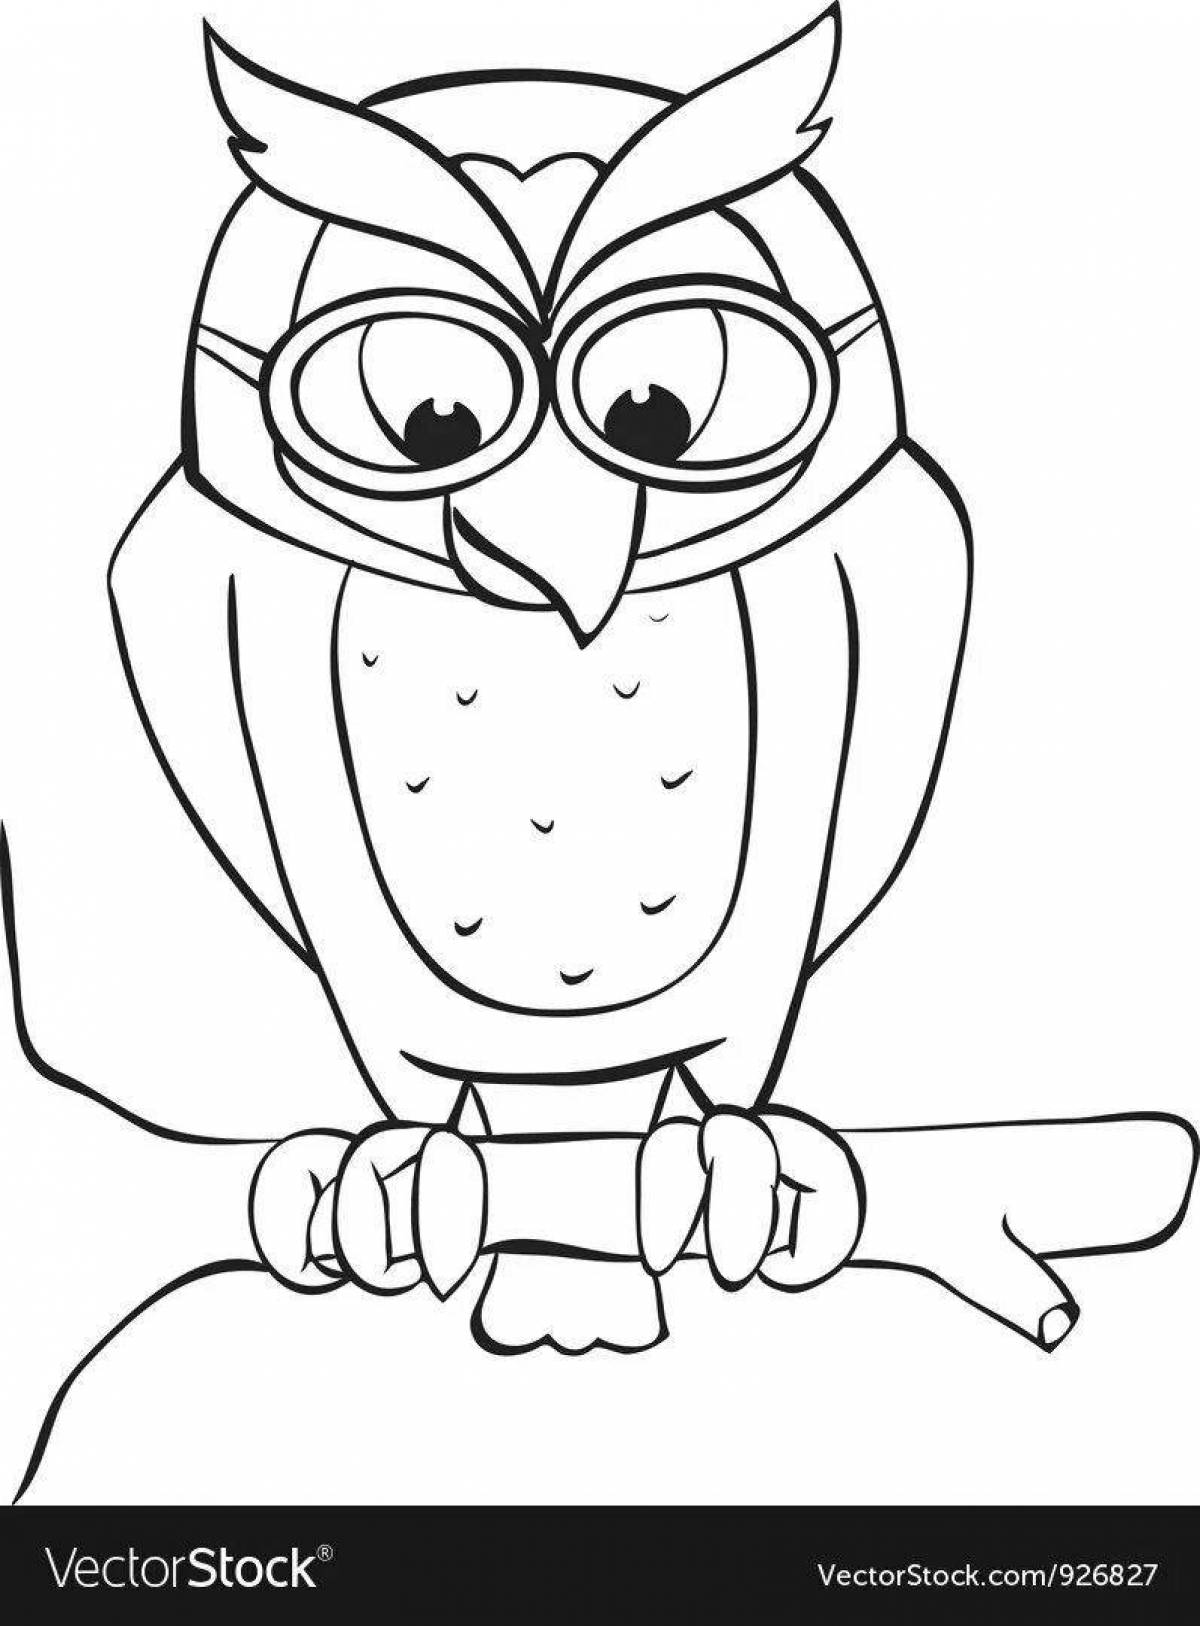 Creative smart owl coloring book for kids